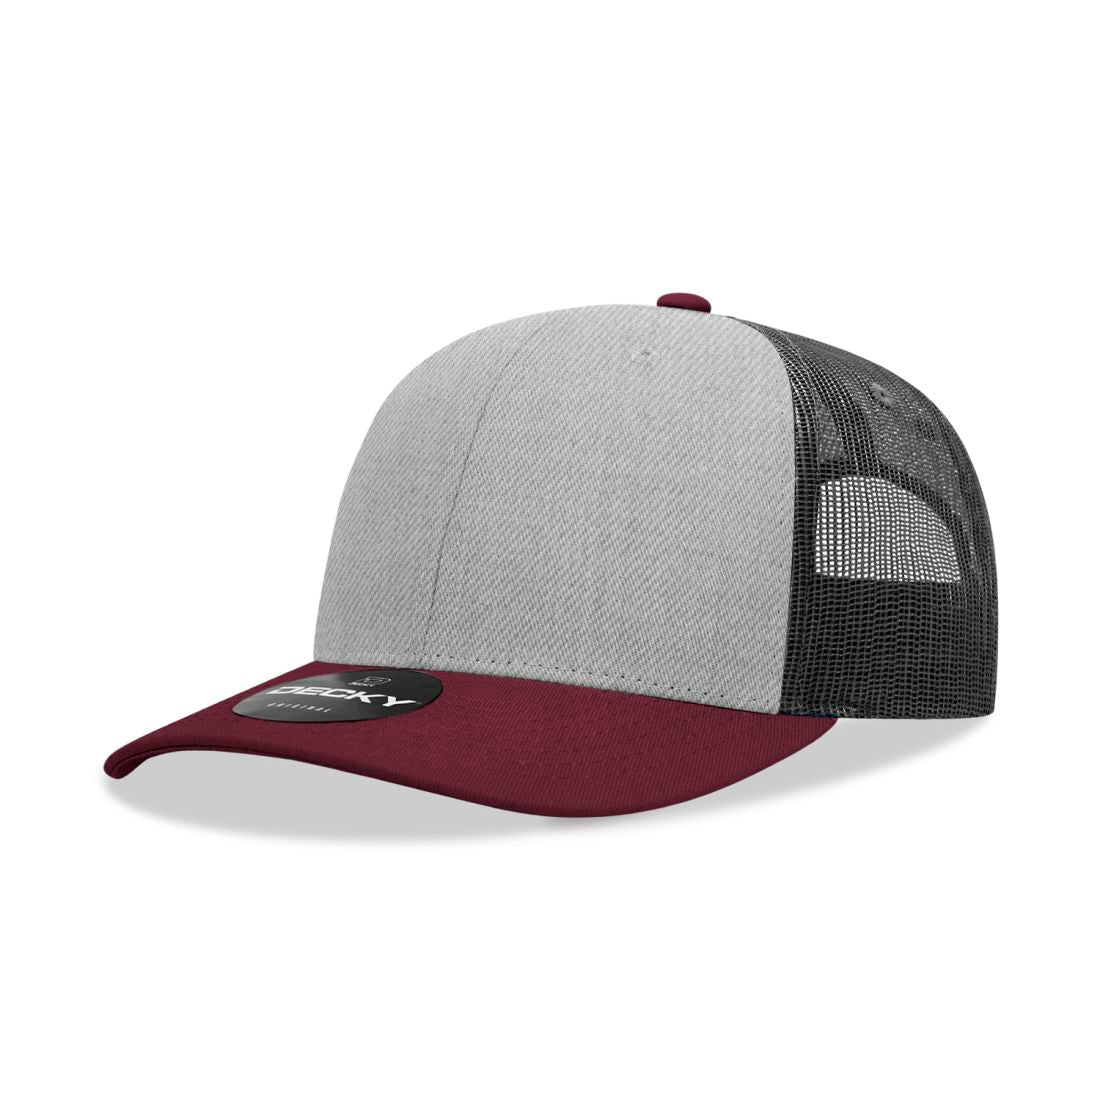 Maroon/Heather Grey/Charcoal color variant